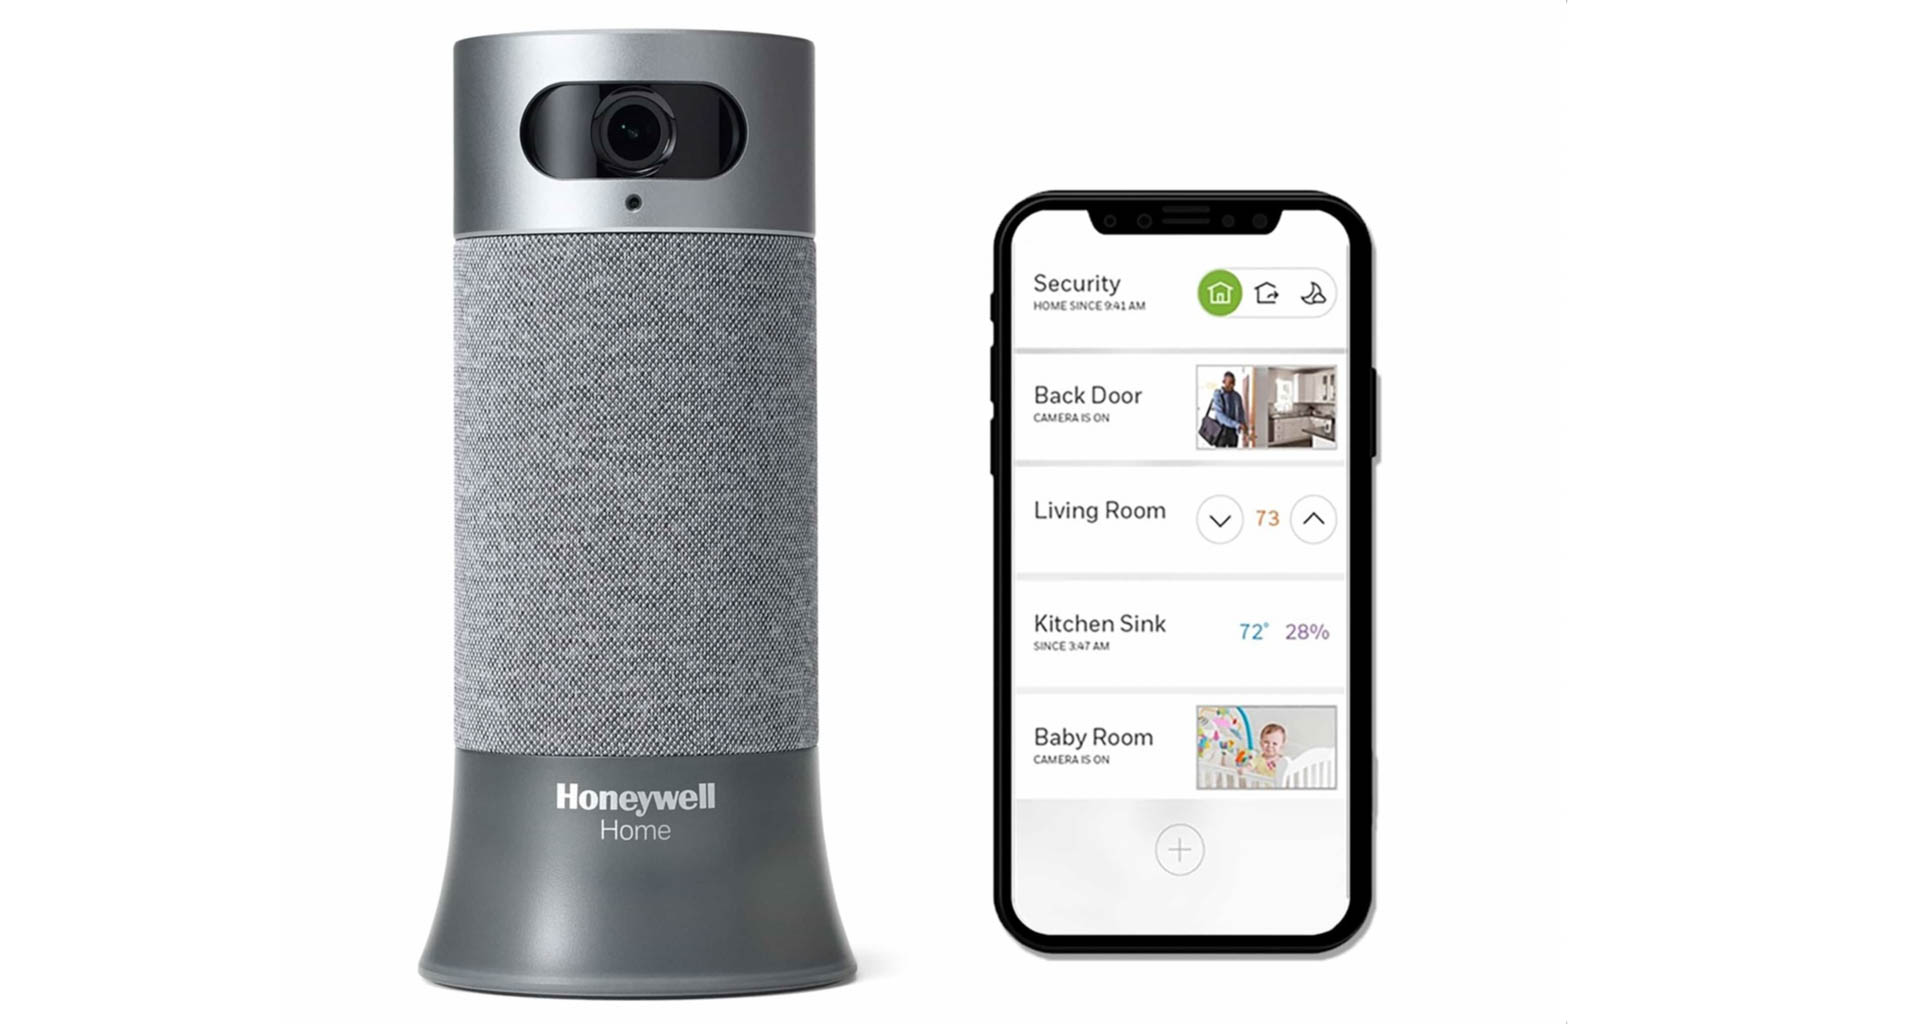 Resideo's Honeywell Home Smart Home Security System. Image: Resideo.